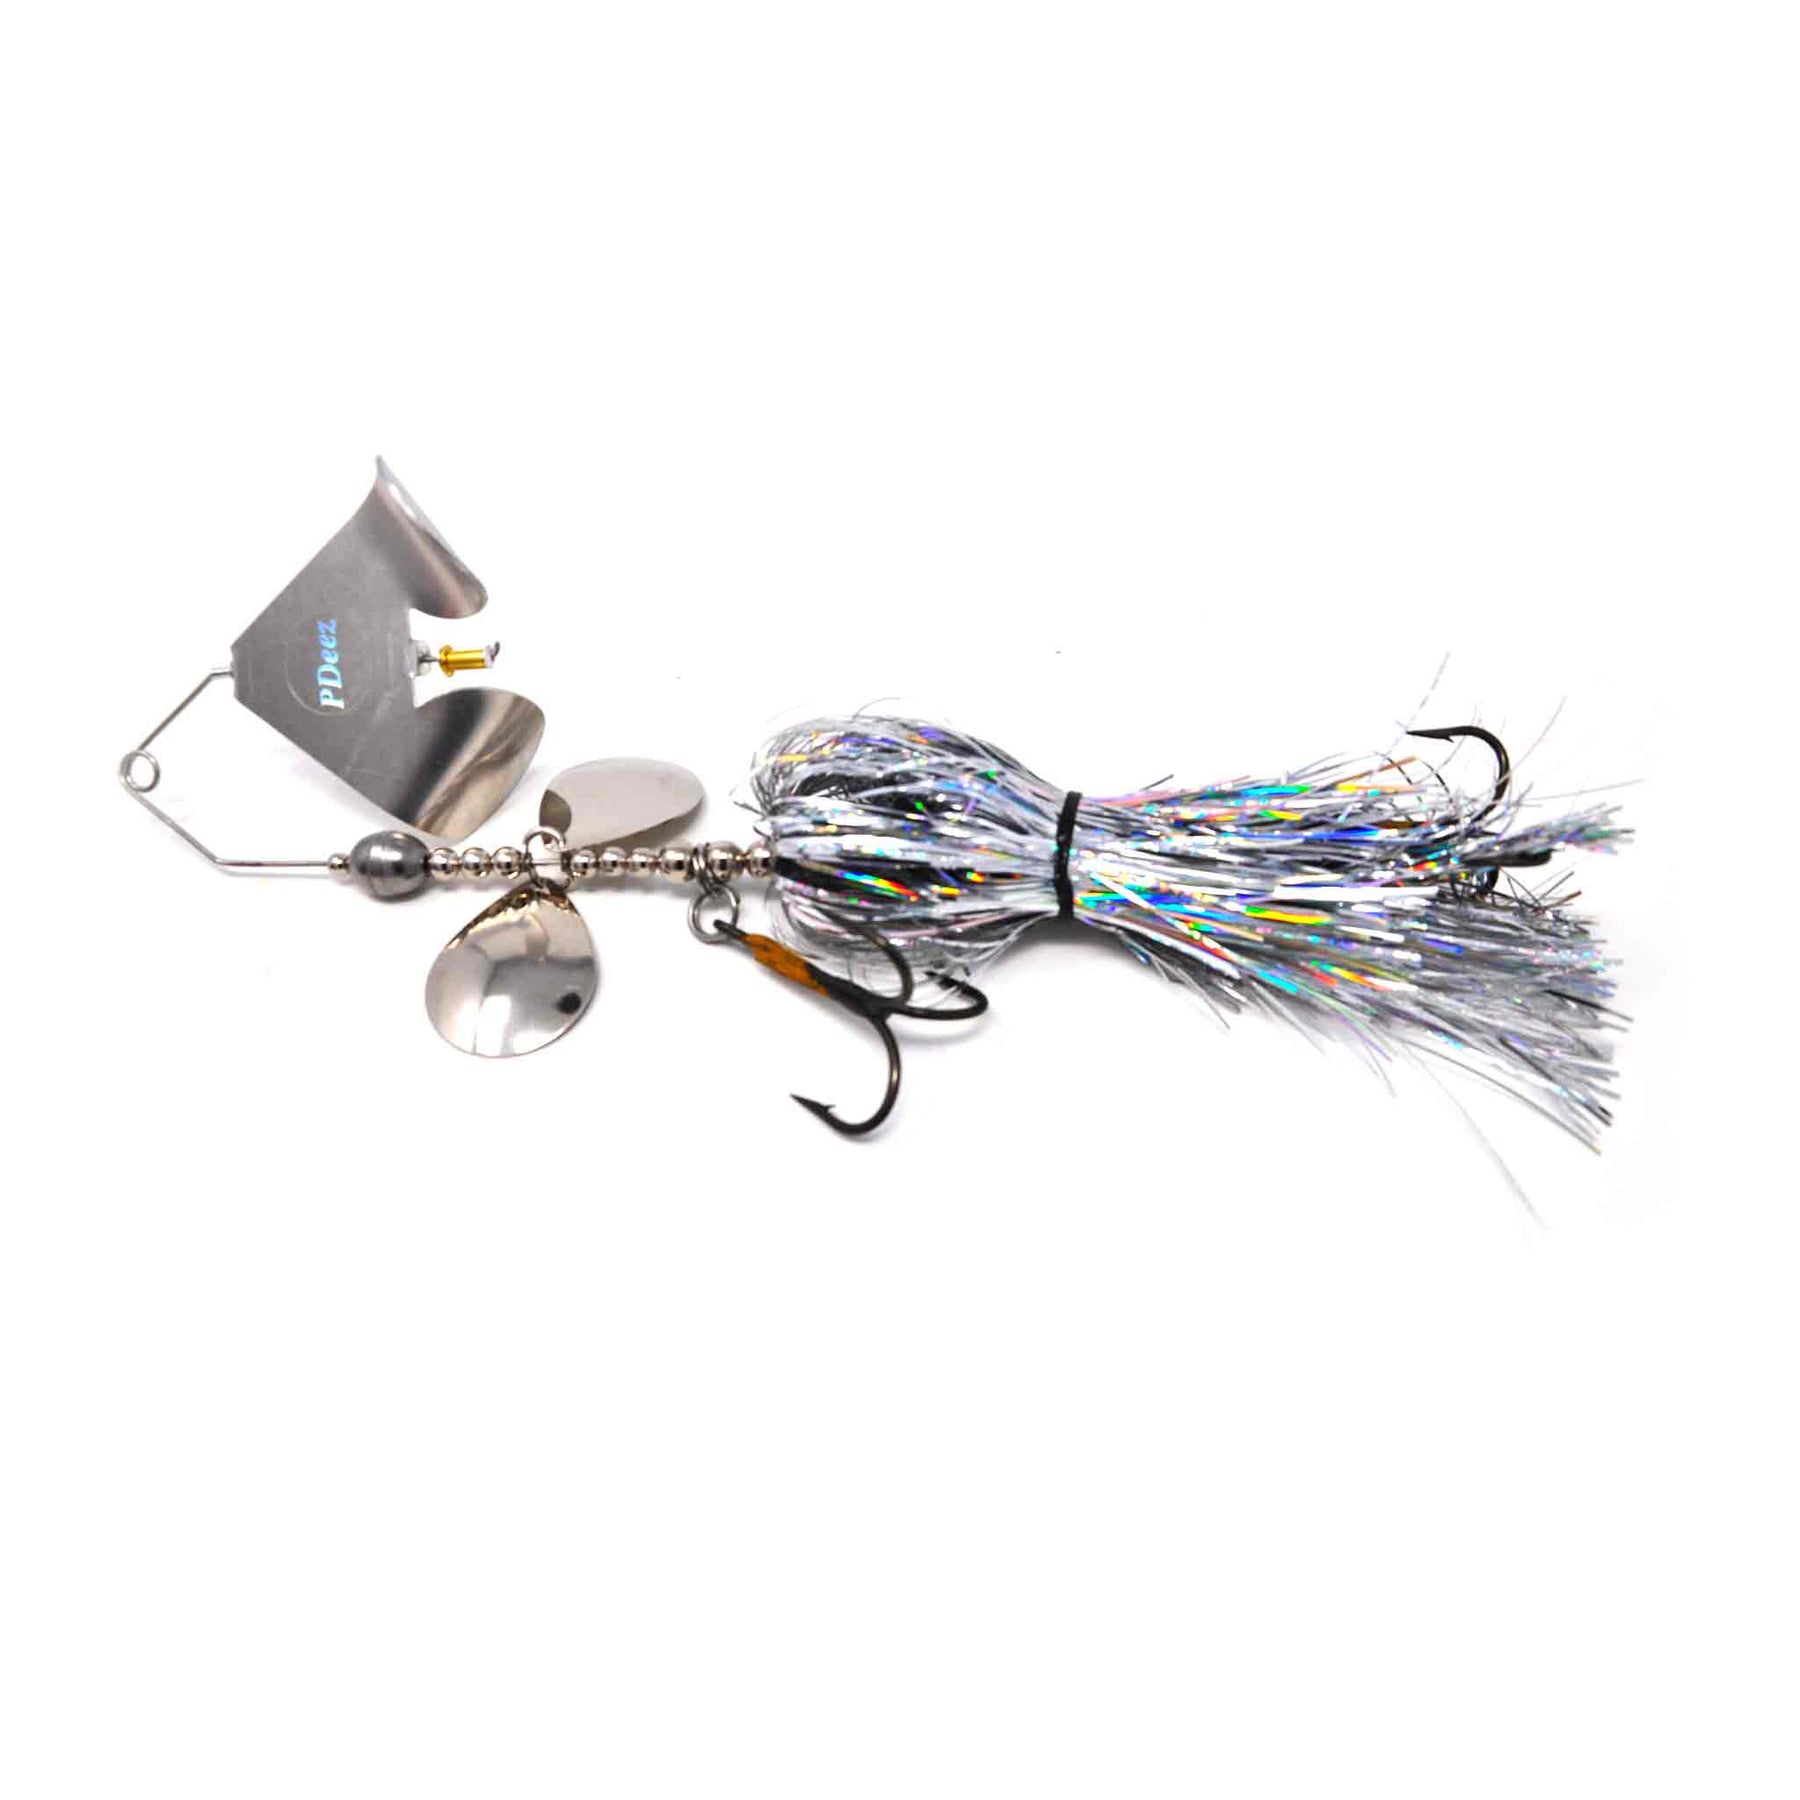 View of Spinnerbaits PDeez Clickbustr Buzzbait Bucktail Sub Zero available at EZOKO Pike and Musky Shop